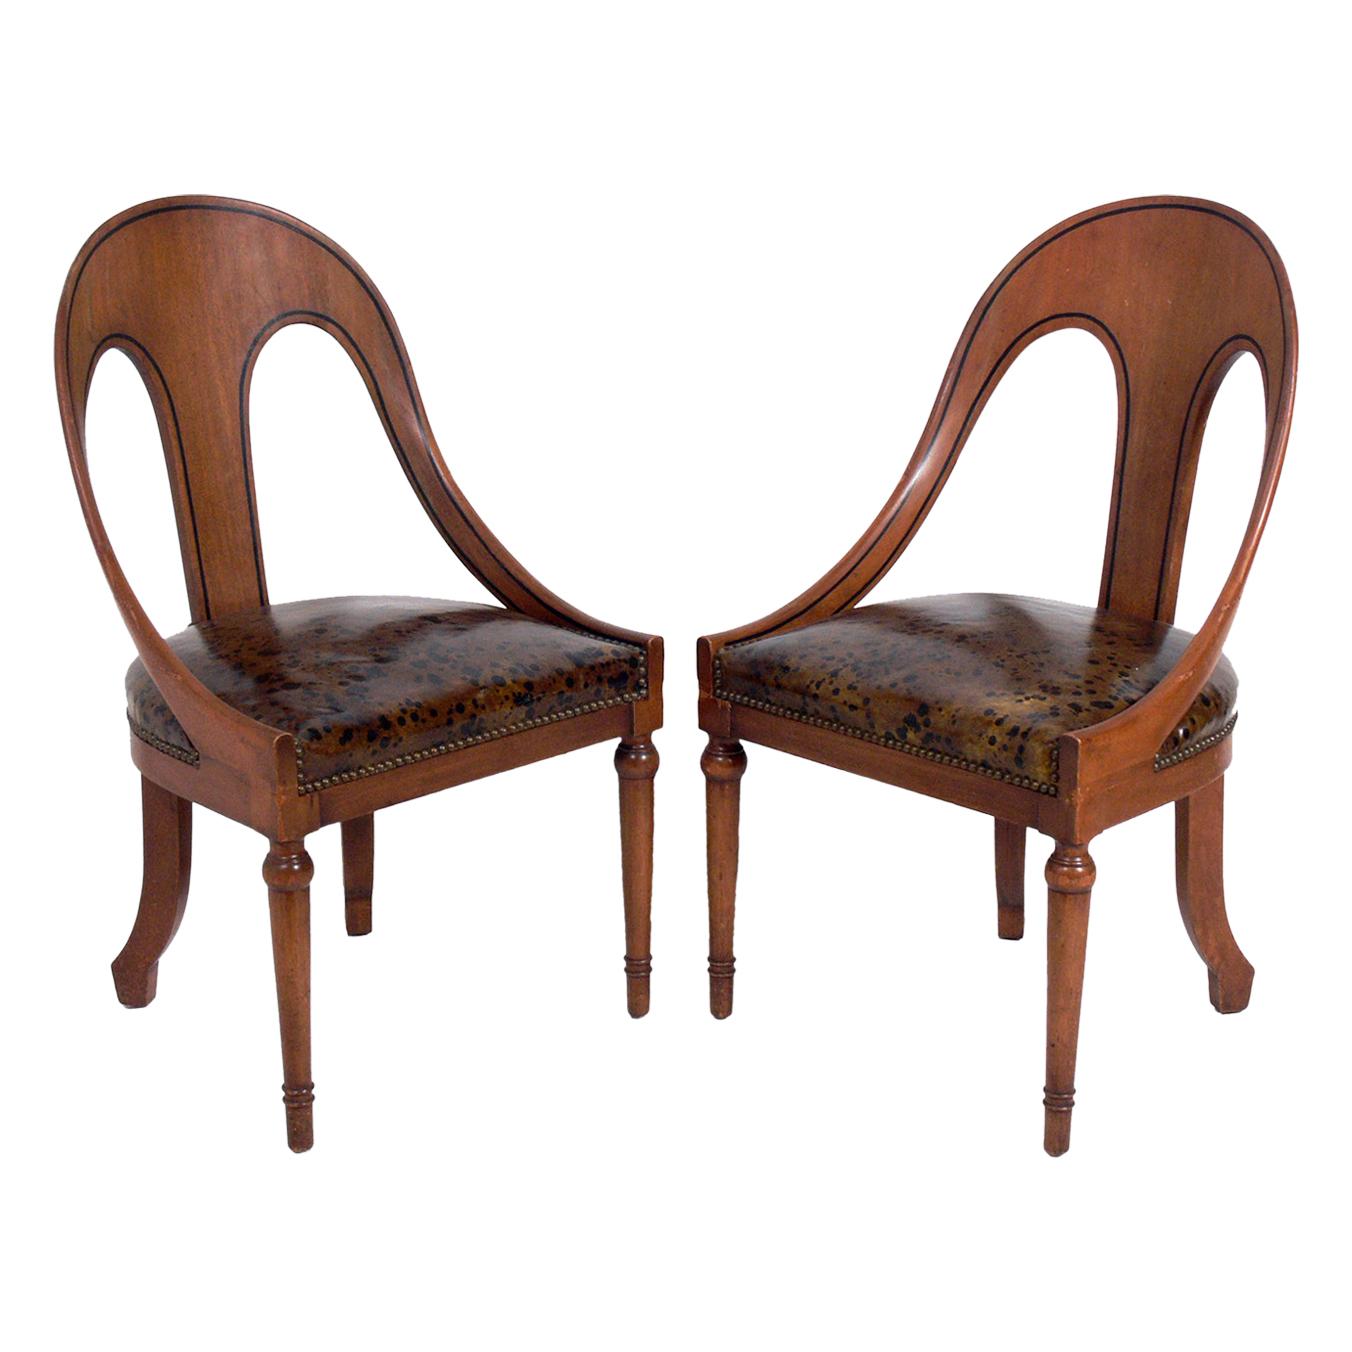 Pair of Spoonback Chairs with Oil Spot Leather Seats